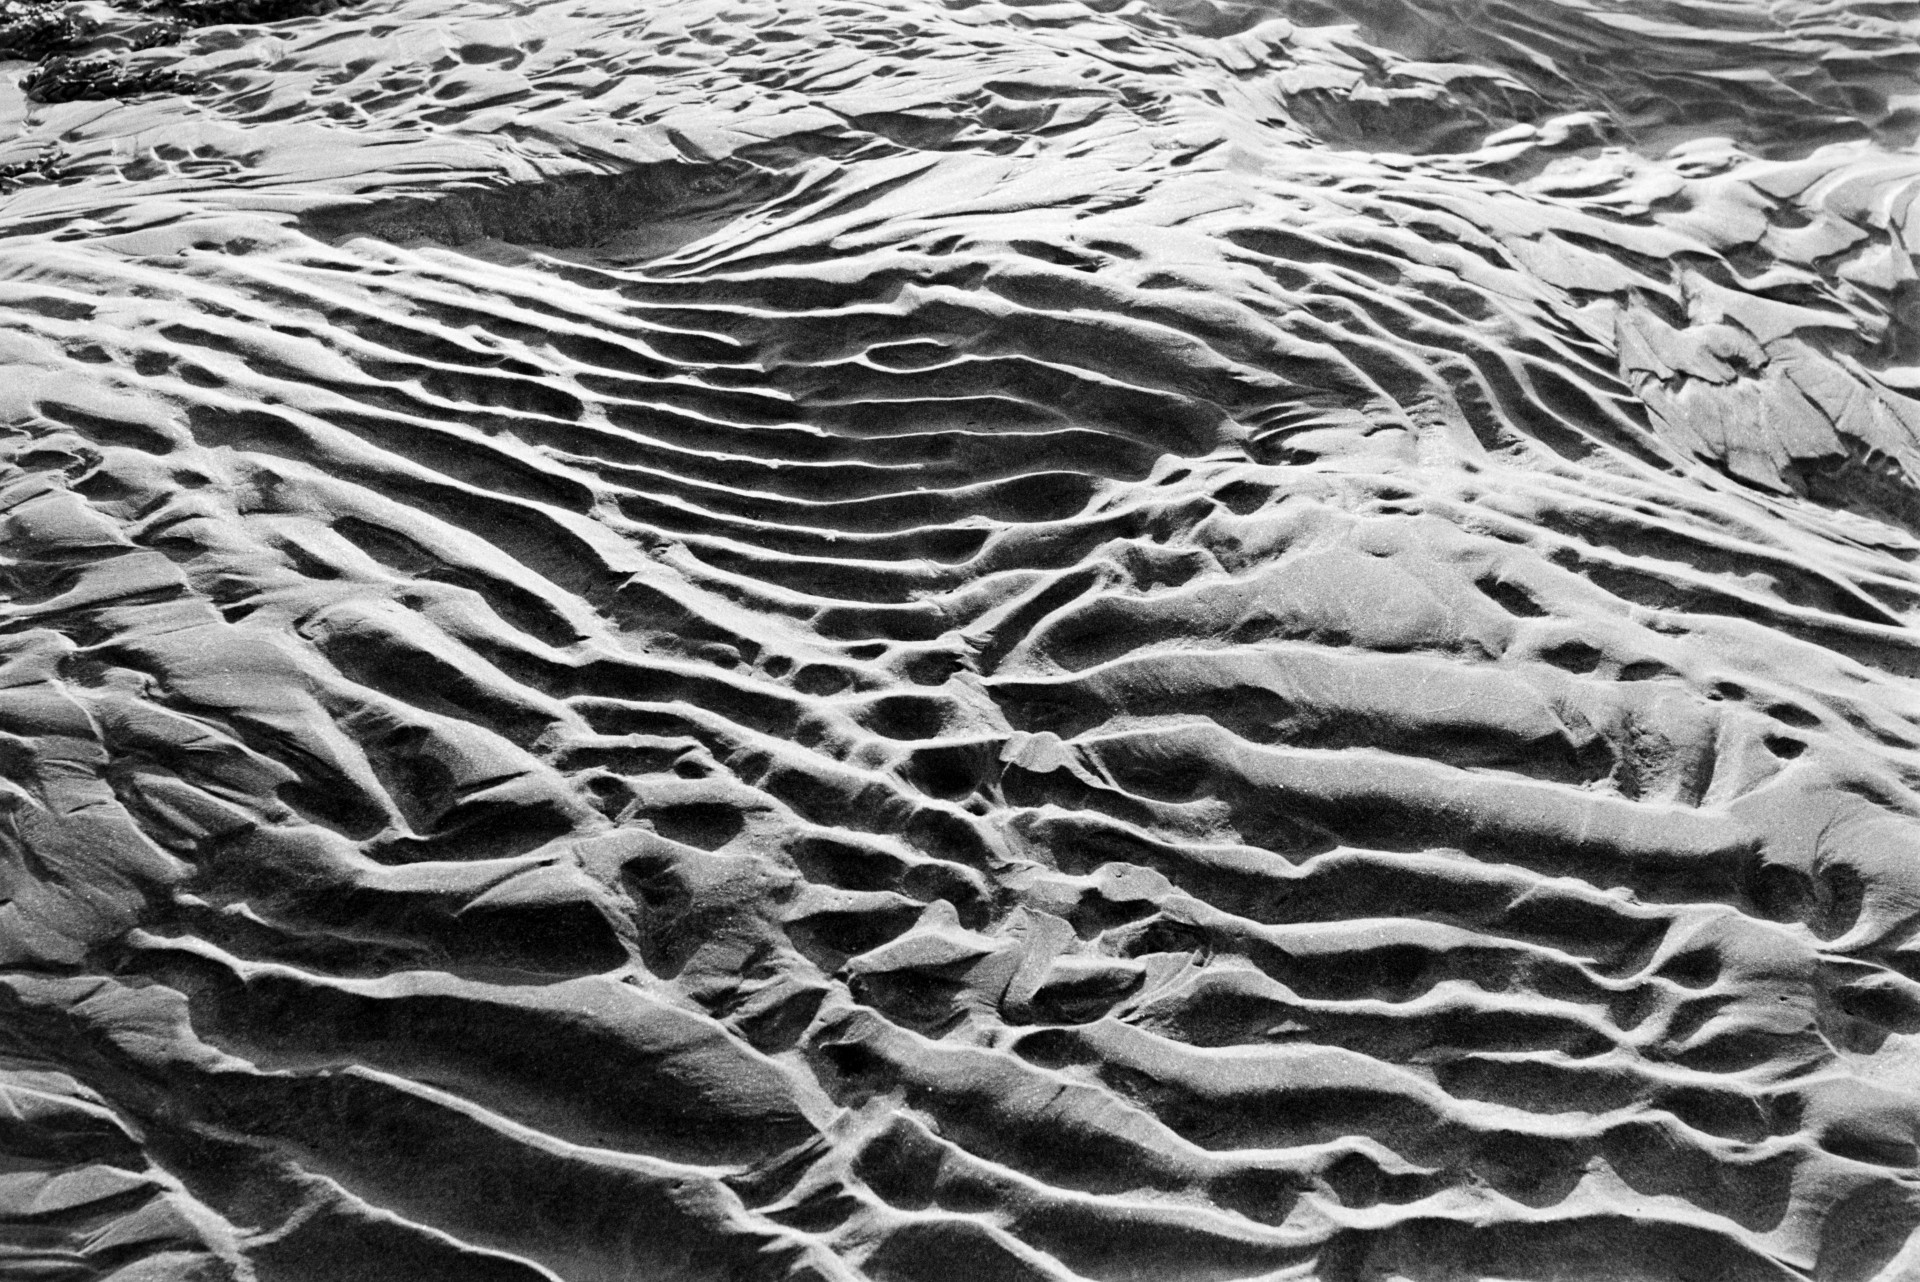 Ripples left in the sand on the beach by the tide at Westward Ho!